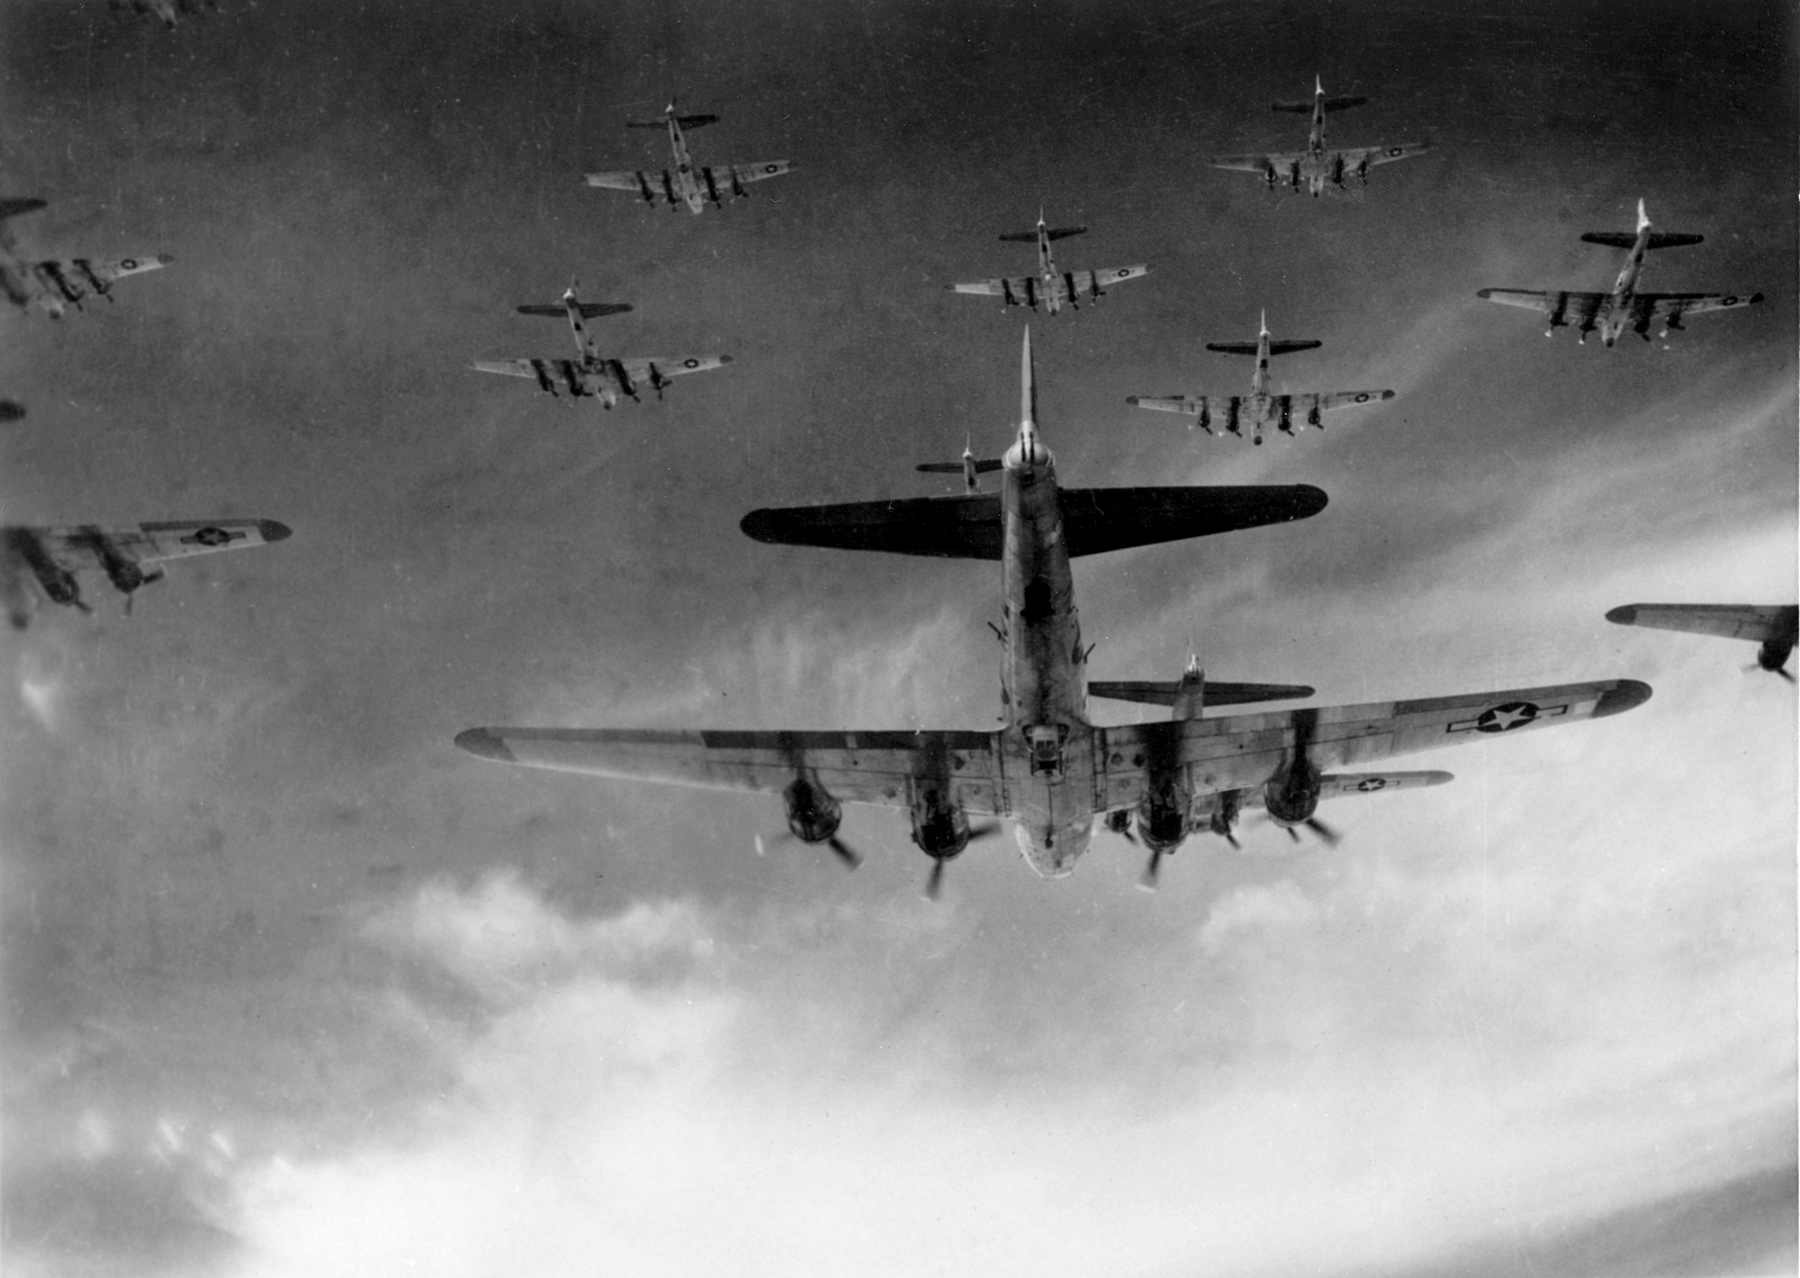 B-17 Flying Fortresses of the 8th Air Force over Germany in 1945. Image courtesy United States Air Force.